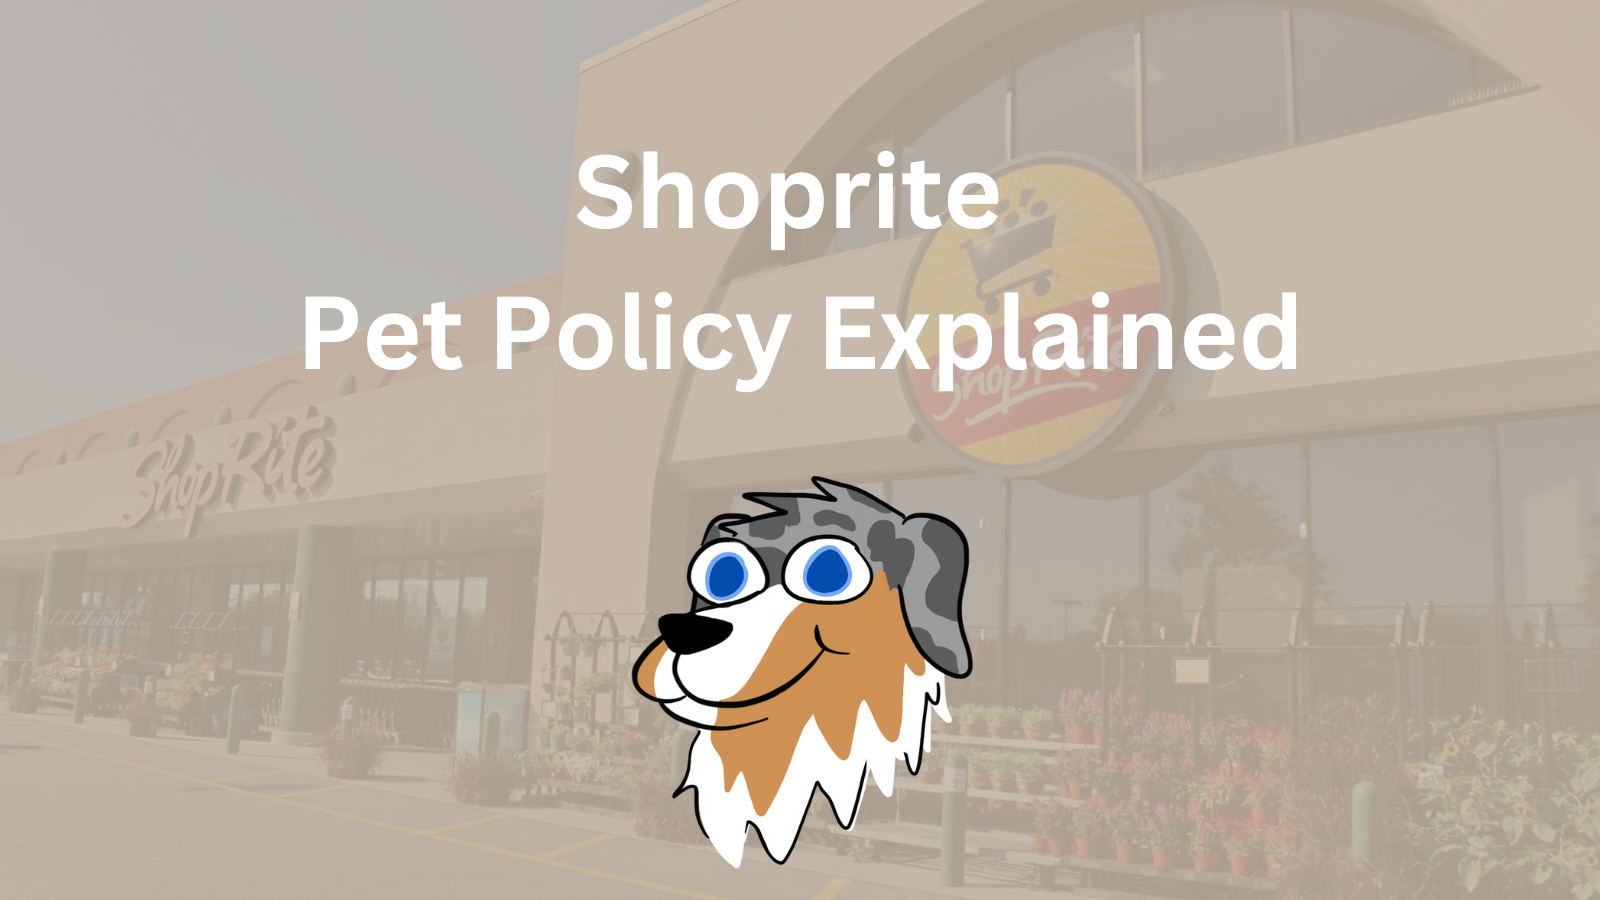 Image Text: "Shoprite Pet Policy Explained"